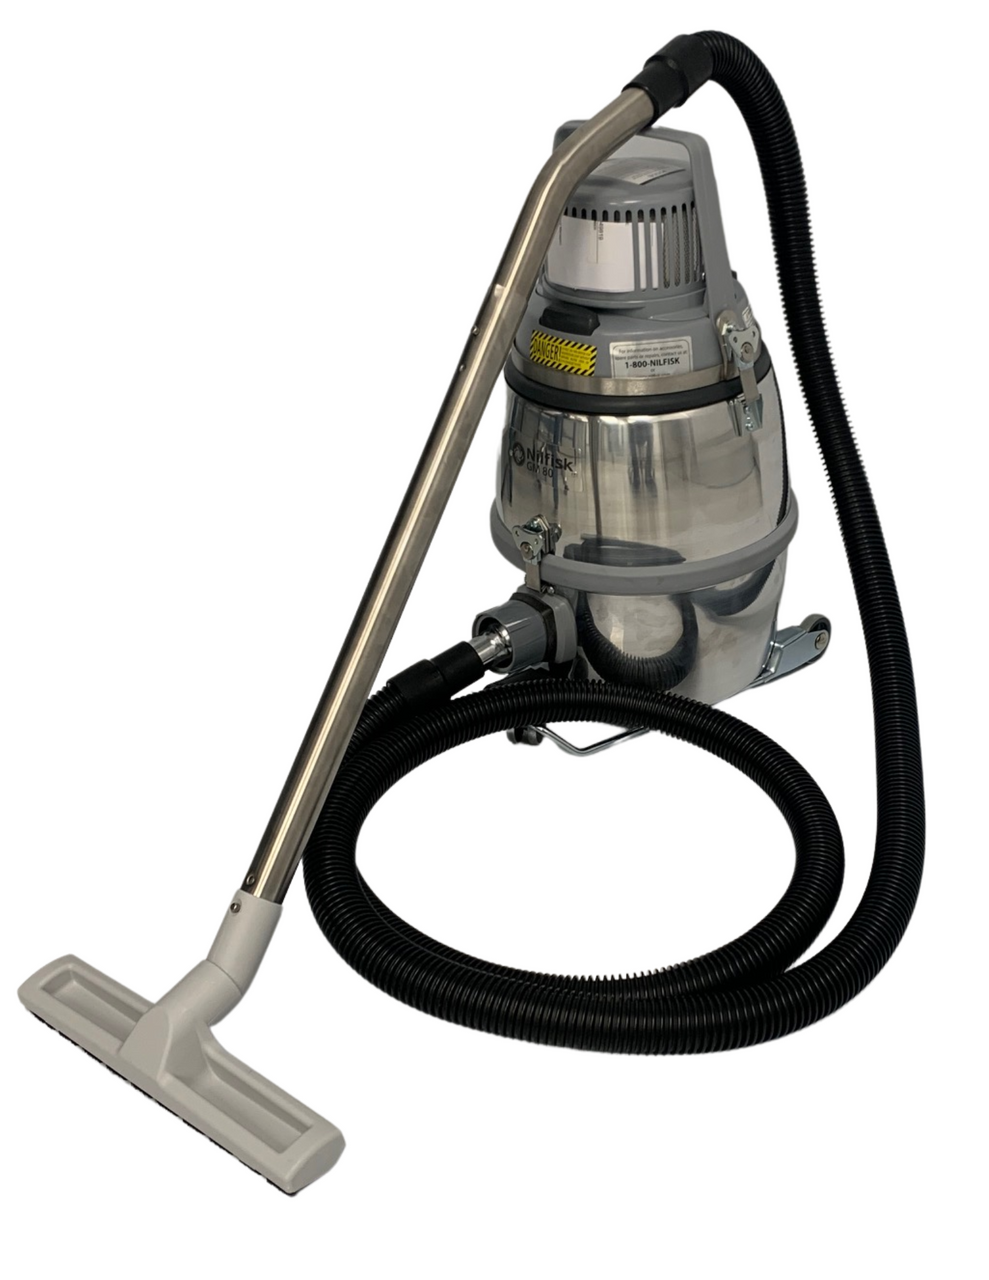 Abe Wrap dominere Nilfisk GM80CR ULPA Filtered, ESD Conductive Hose and Accessories,  NI-01790150 - Cleanroom World